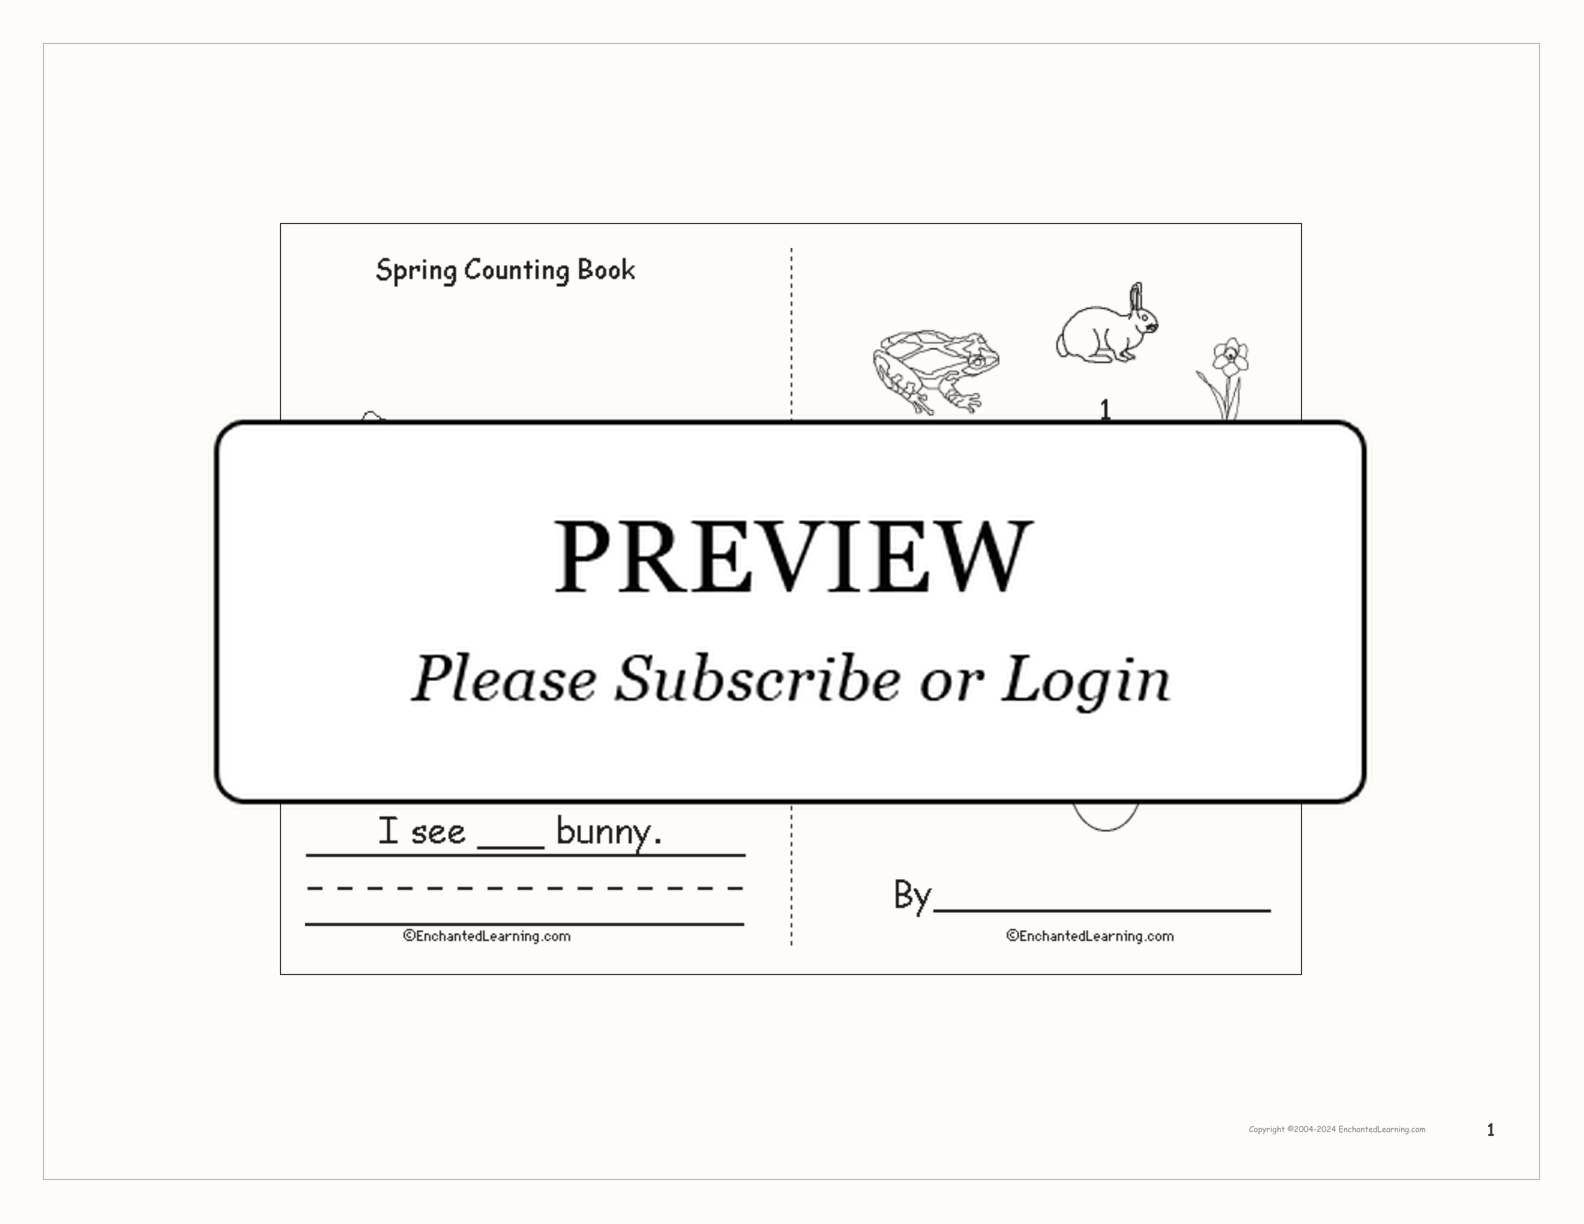 Spring Counting Book interactive worksheet page 1